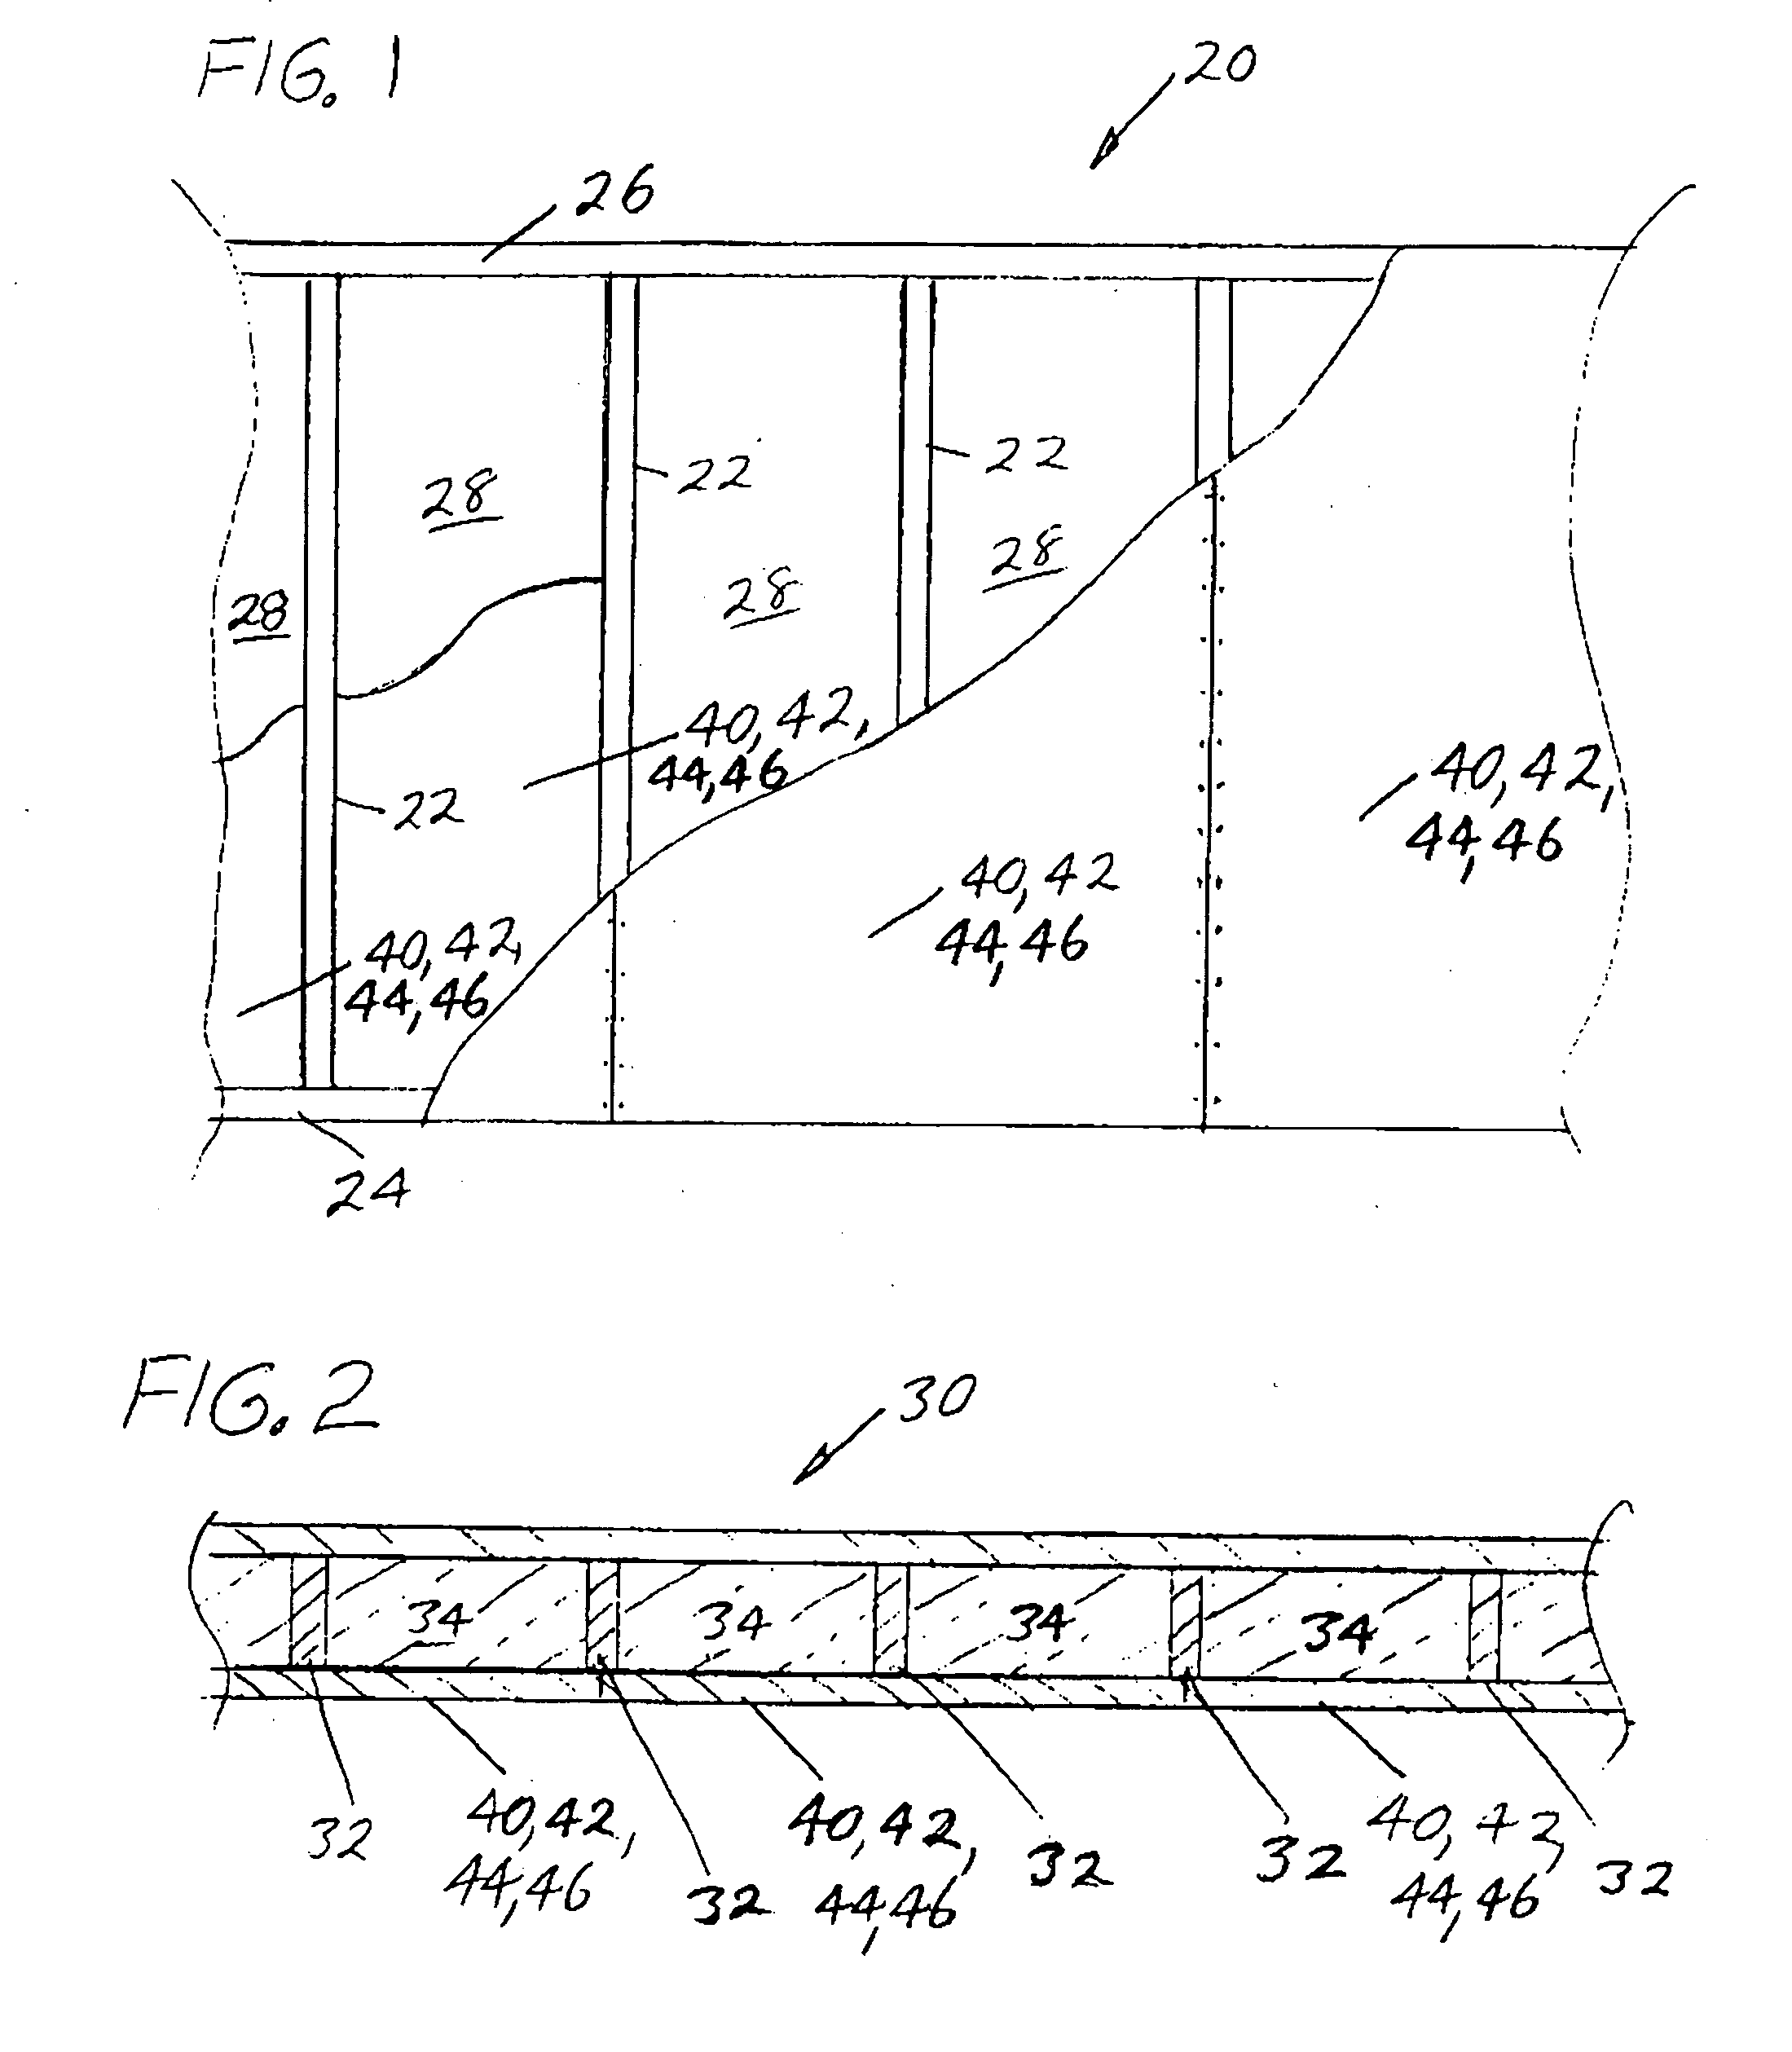 Polymer-based composite structural sheathing board and wall and/or ceilling system